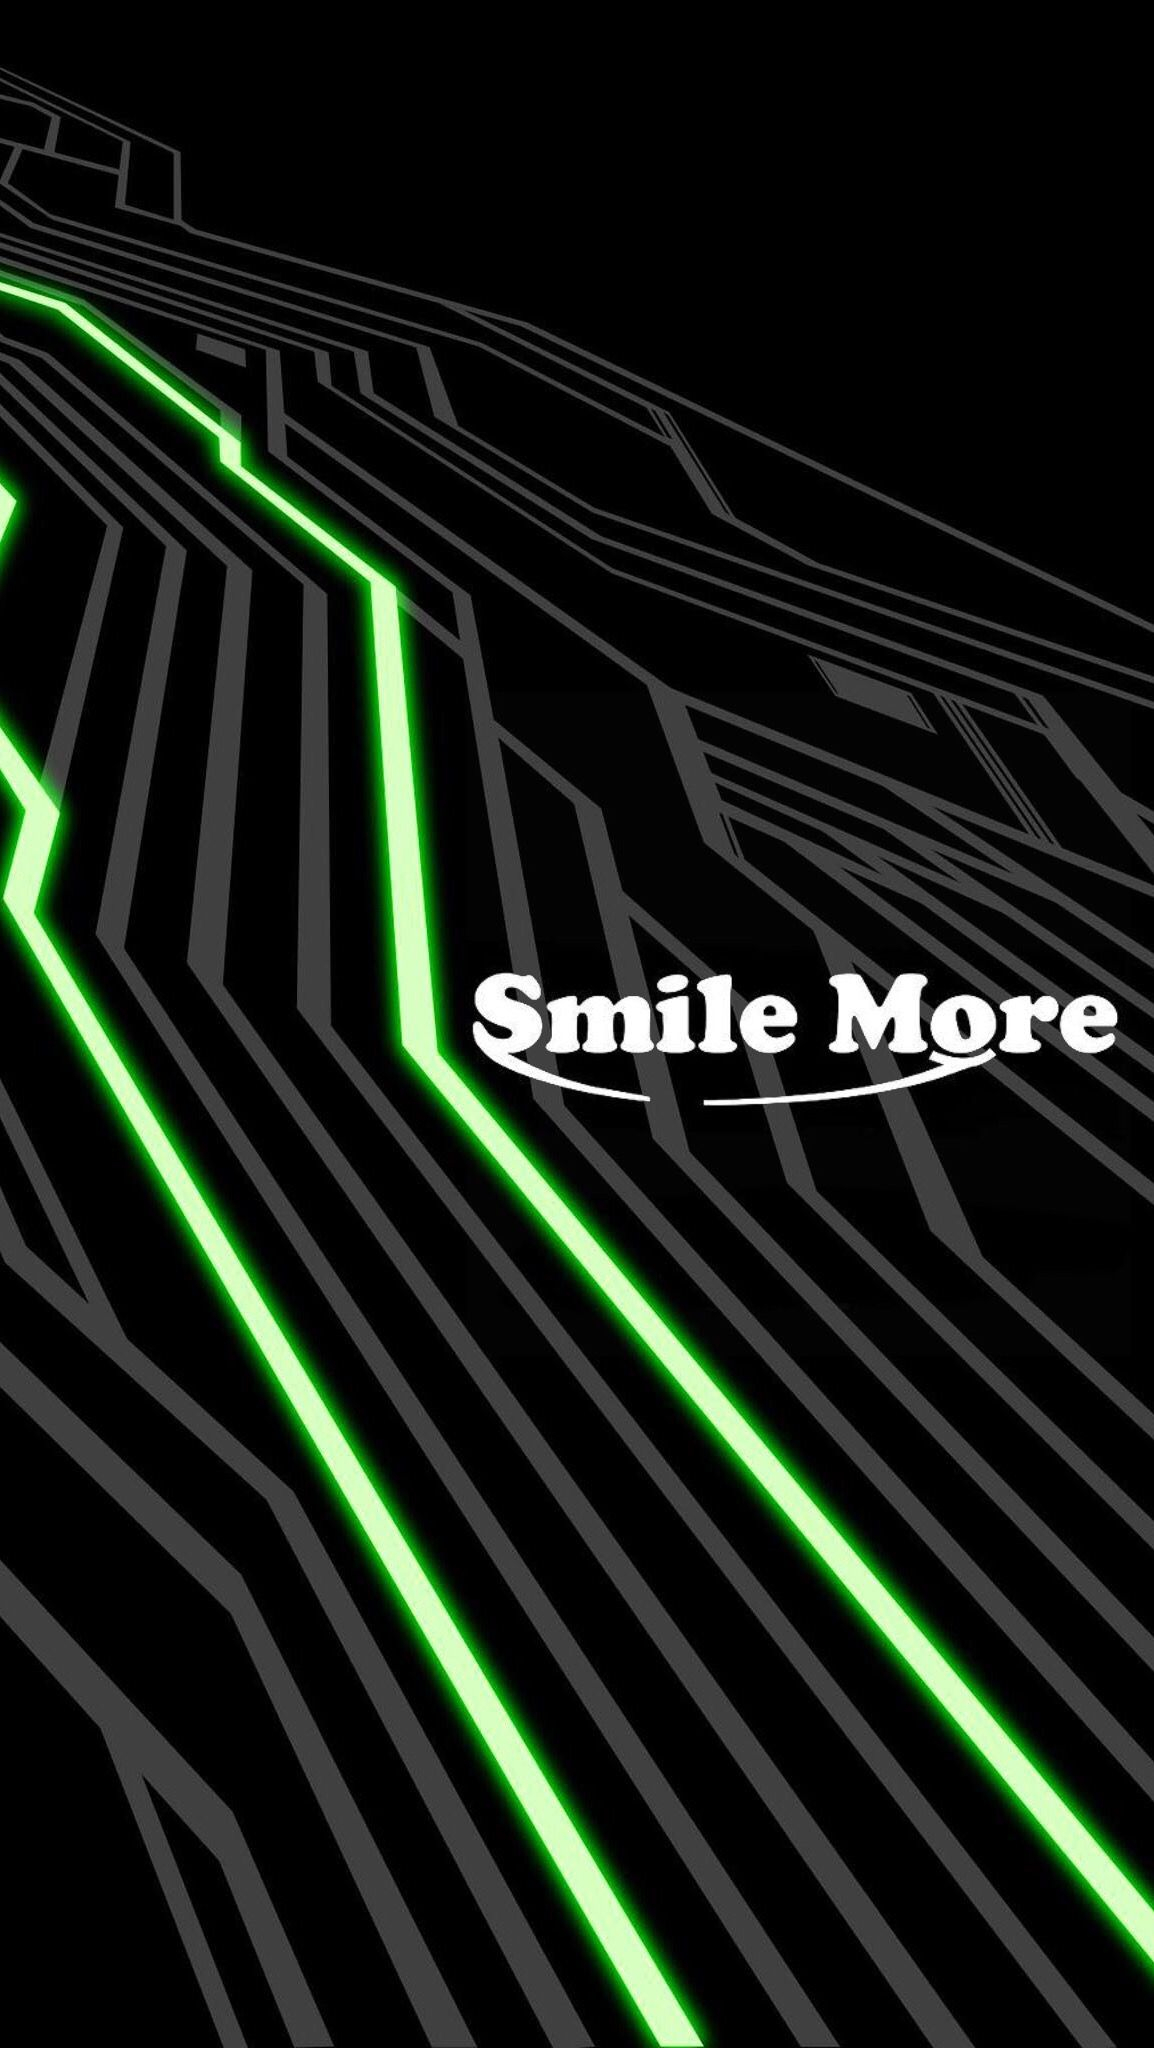 1154x2048 Smile More #romanatwood #smilemore #iphone #wallpapers | Smile pictures, More wallpaper, Smile images